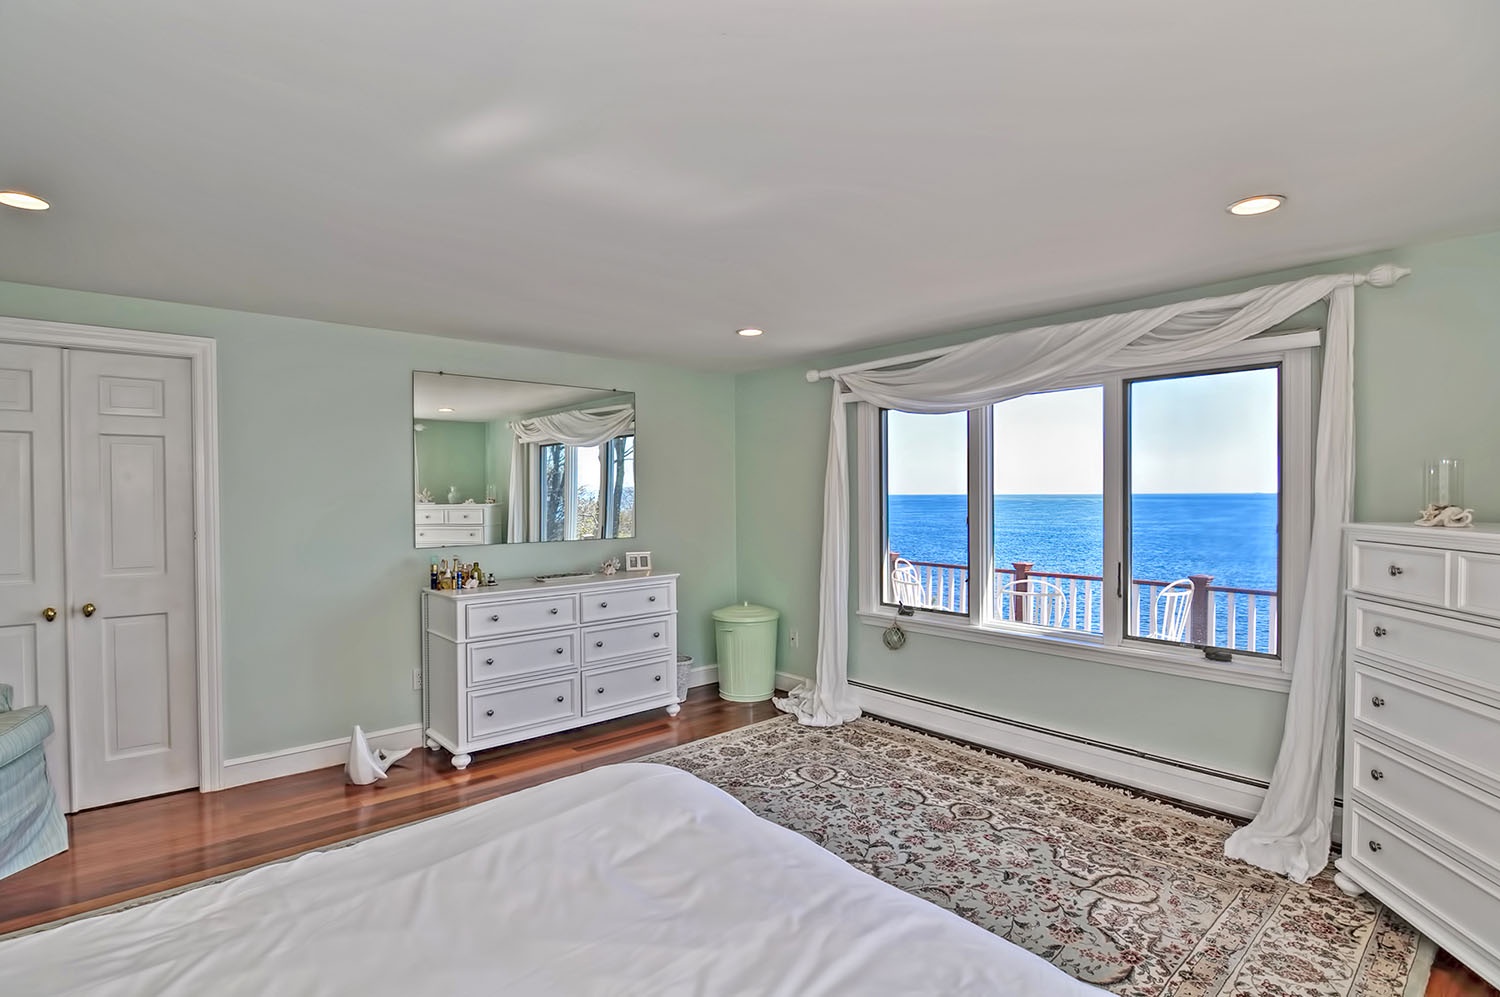 The master bedroom has a glorious ocean view.